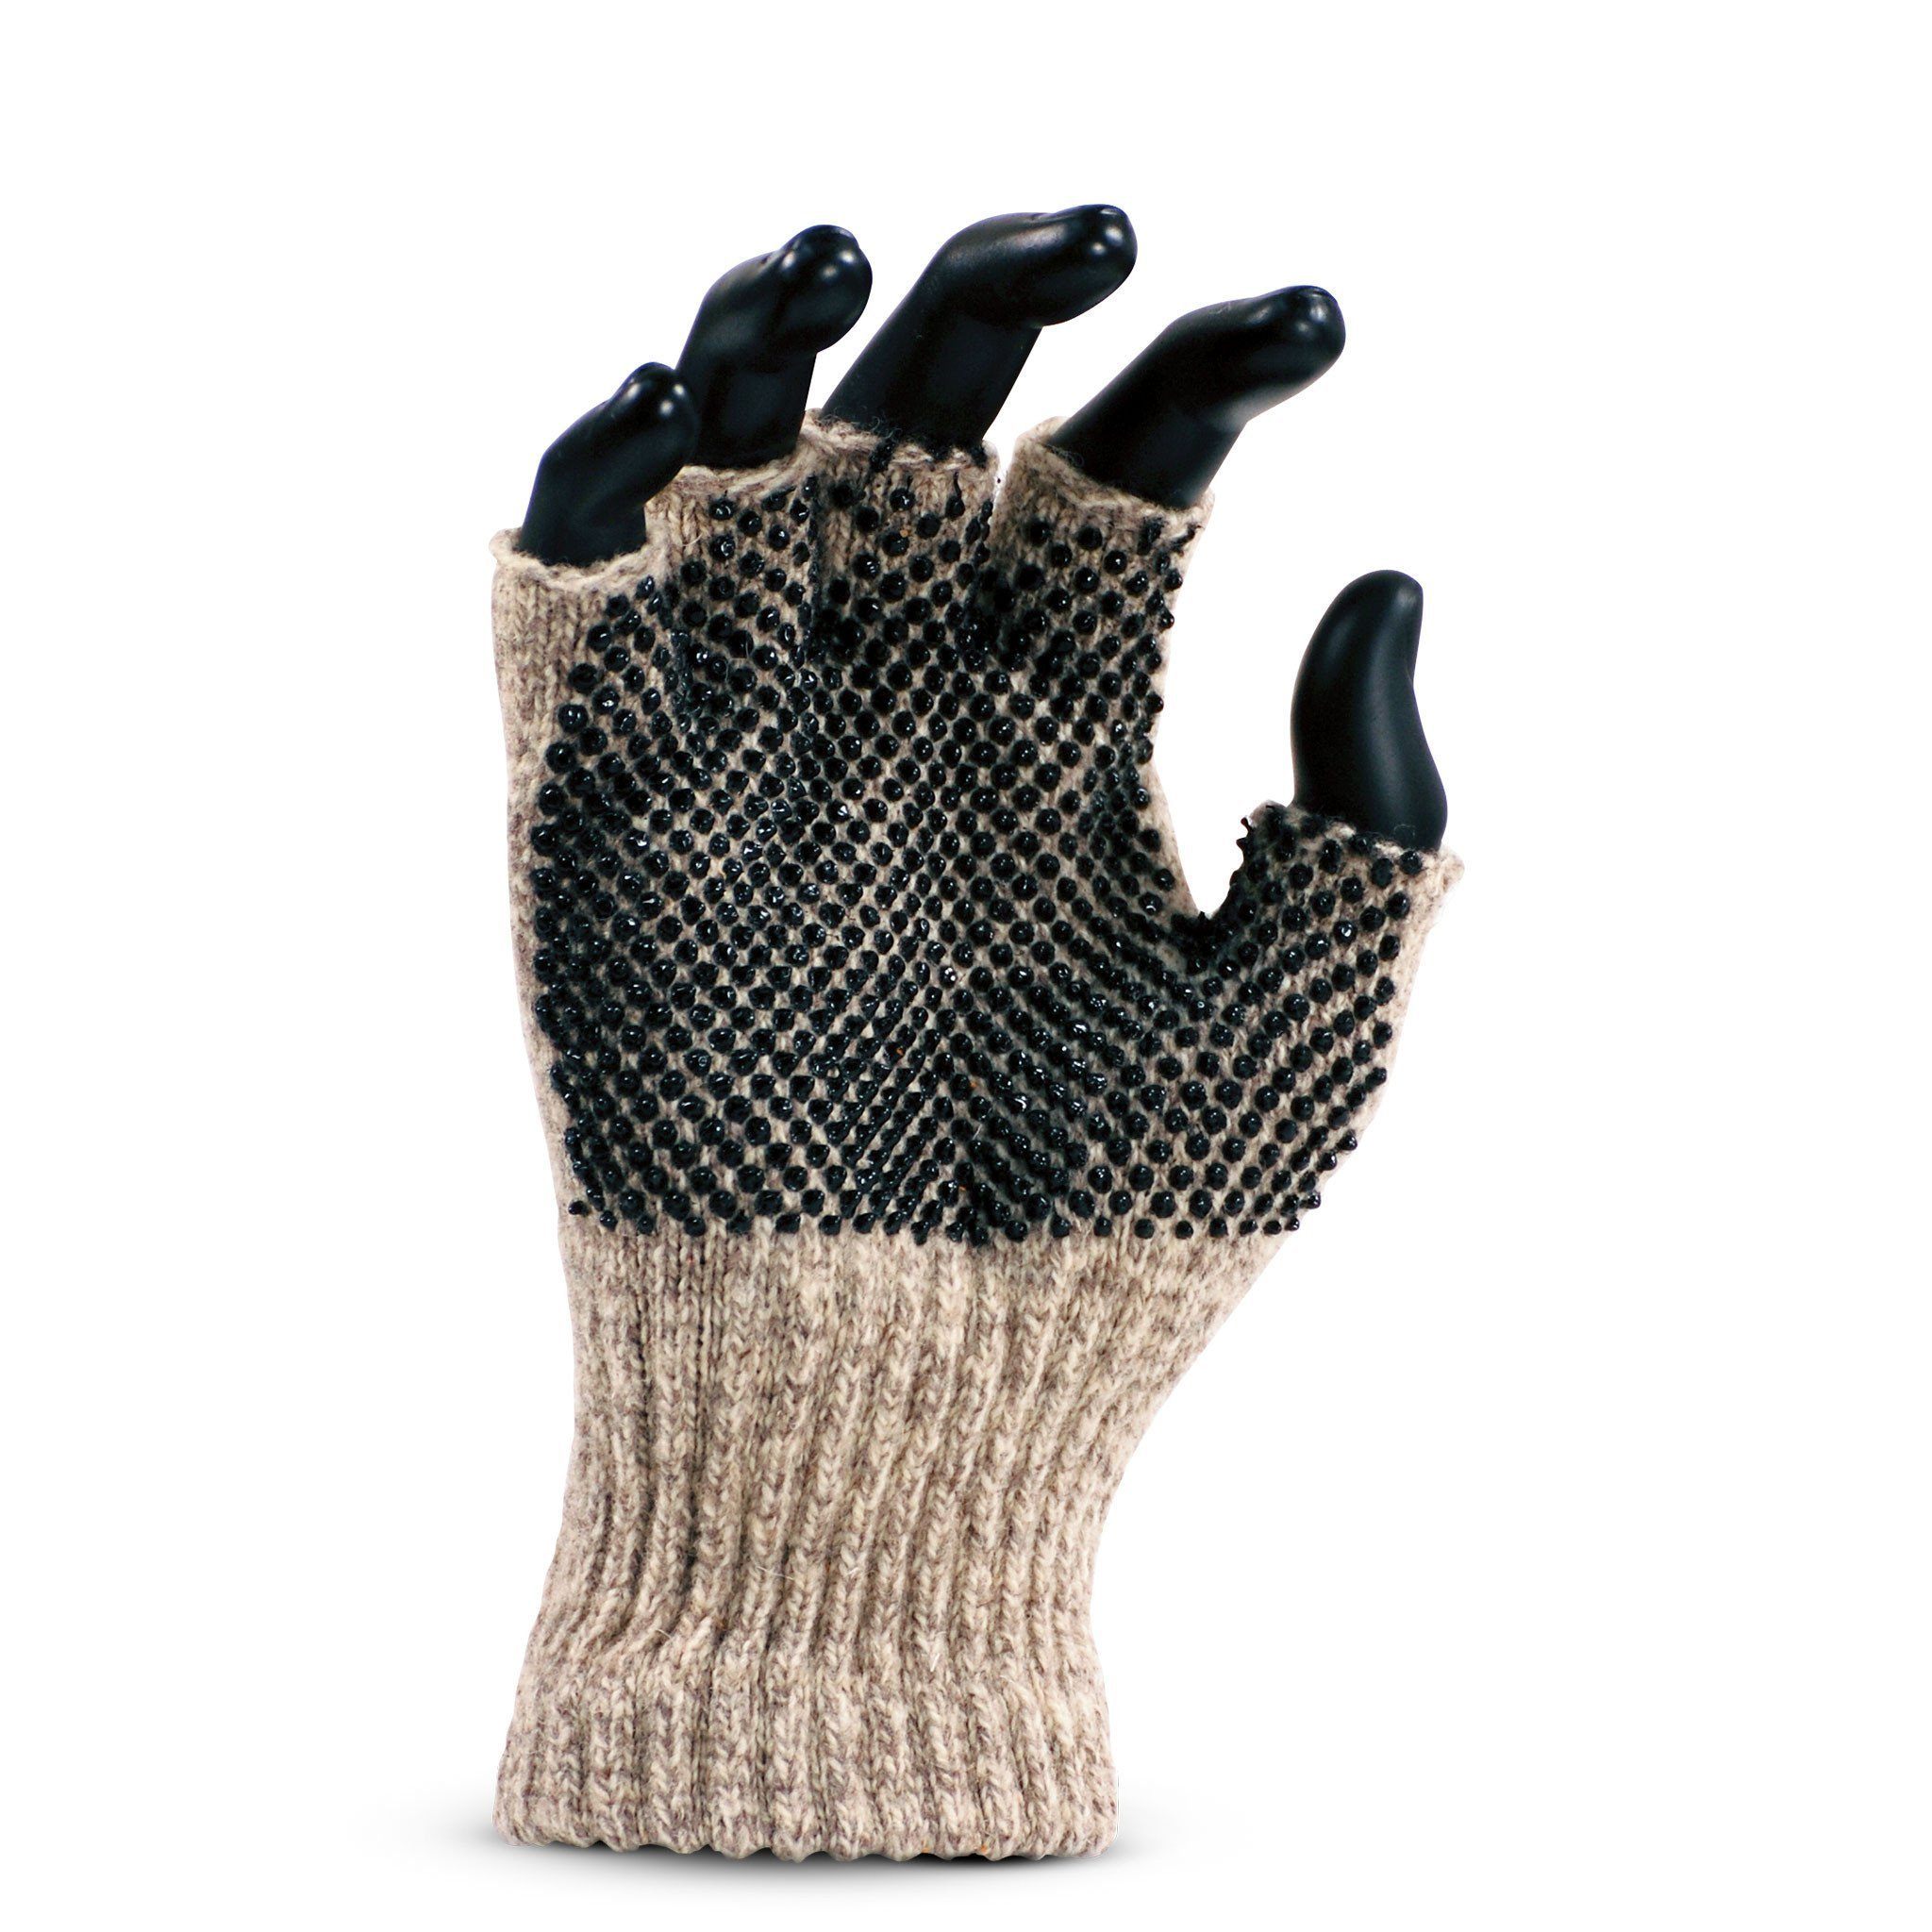 Recommendation on gloves to all fishermen: Use fingerless wool